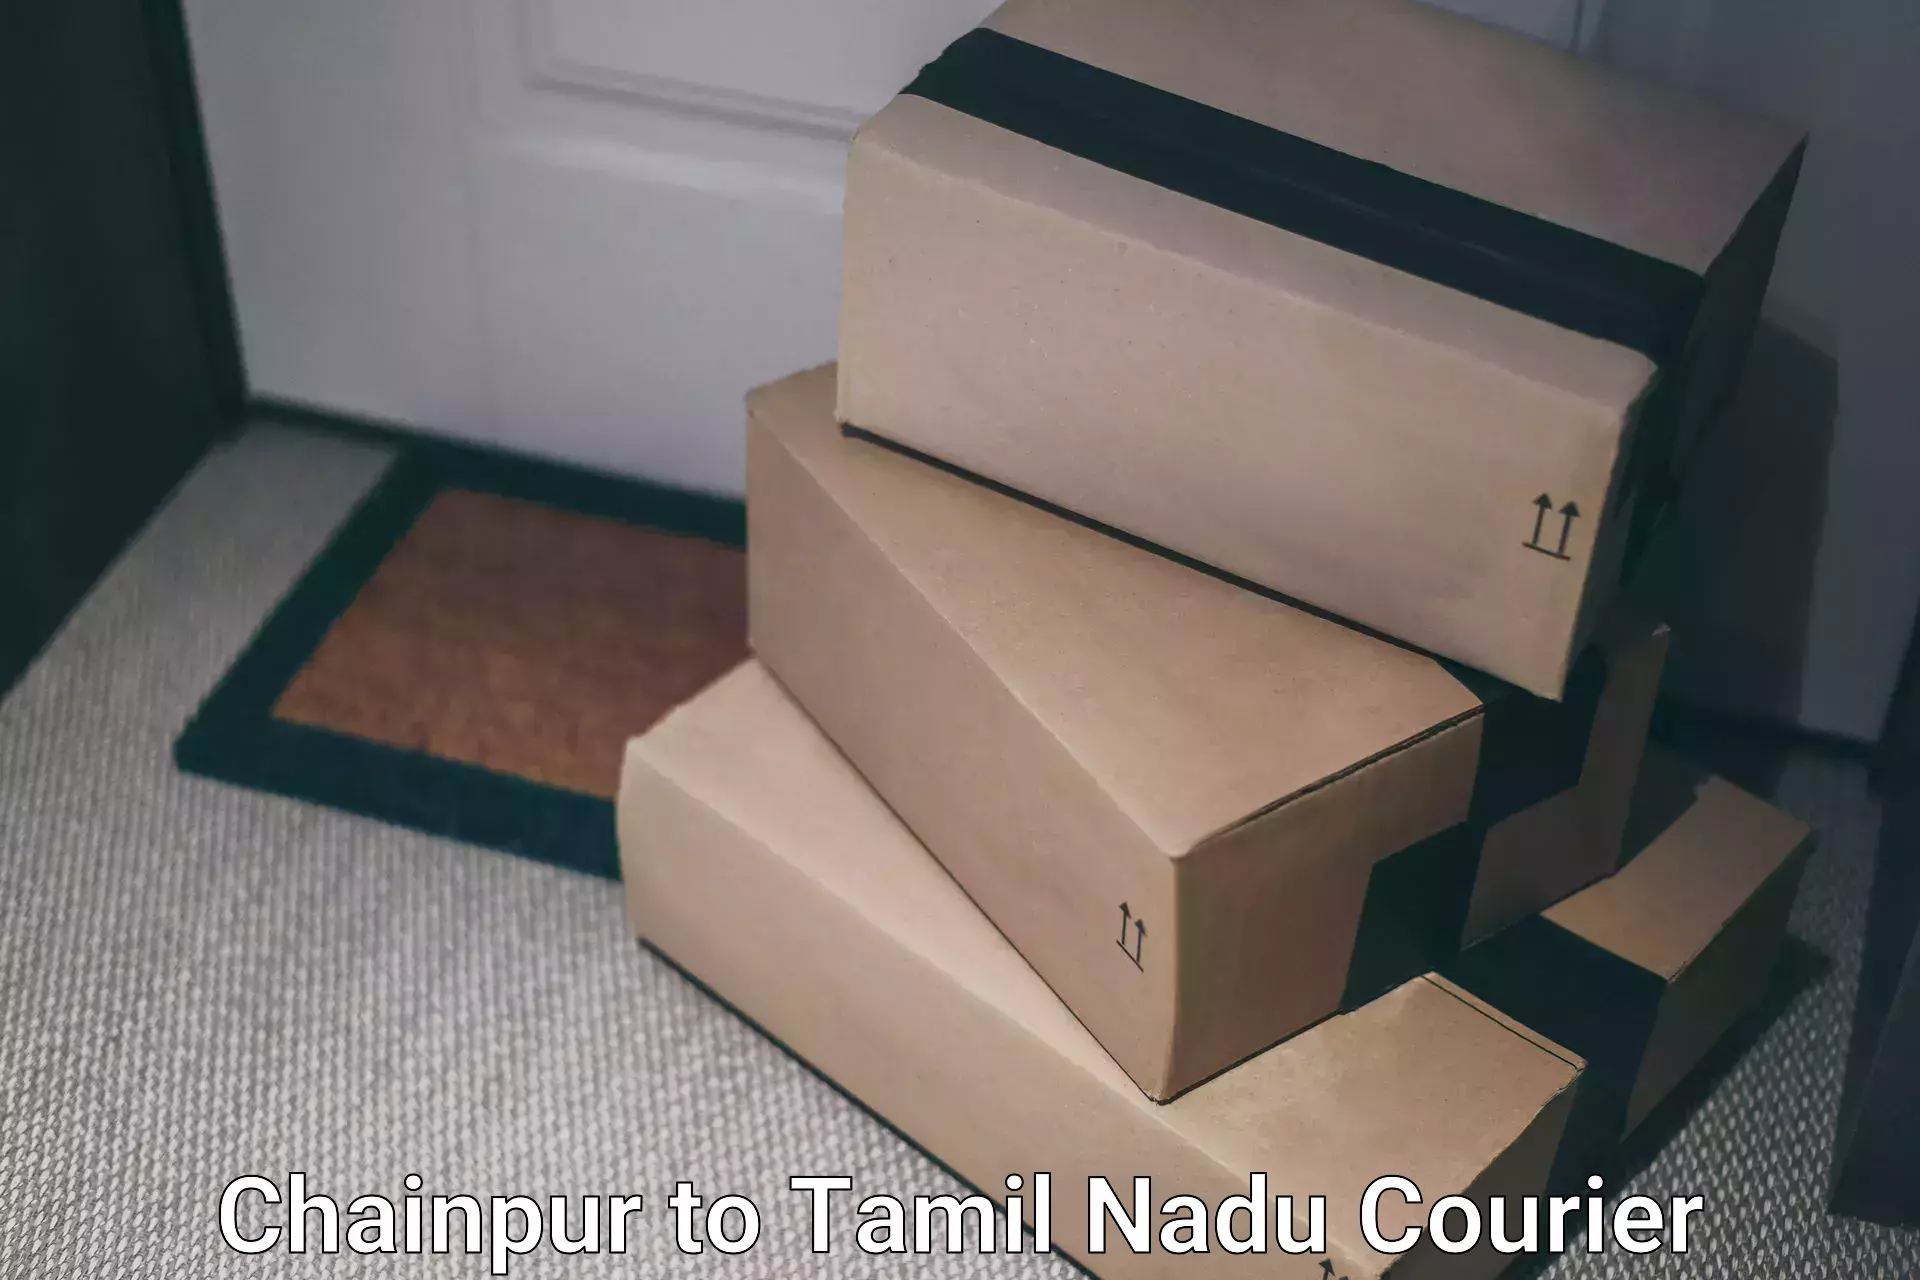 High-priority parcel service Chainpur to Chennai Port